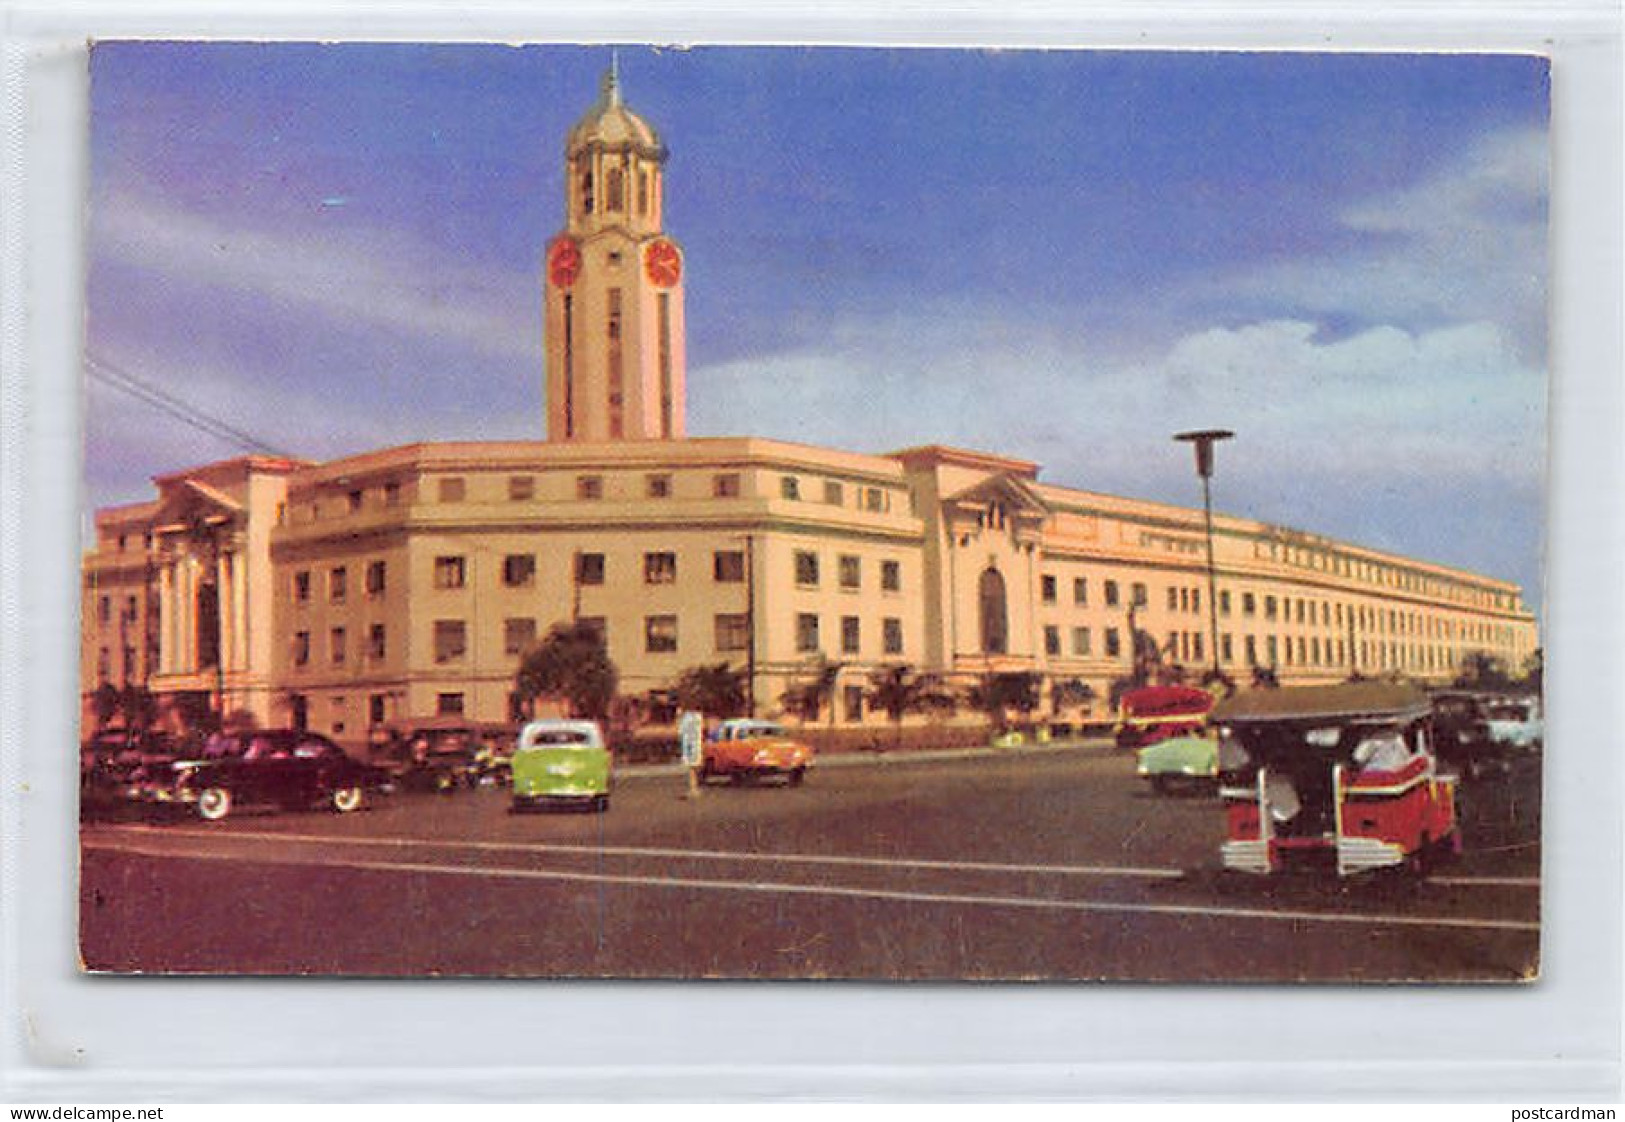 Philippines - MANILA - City Hall - Publ. Goodwill Trading Co.  - Philippinen